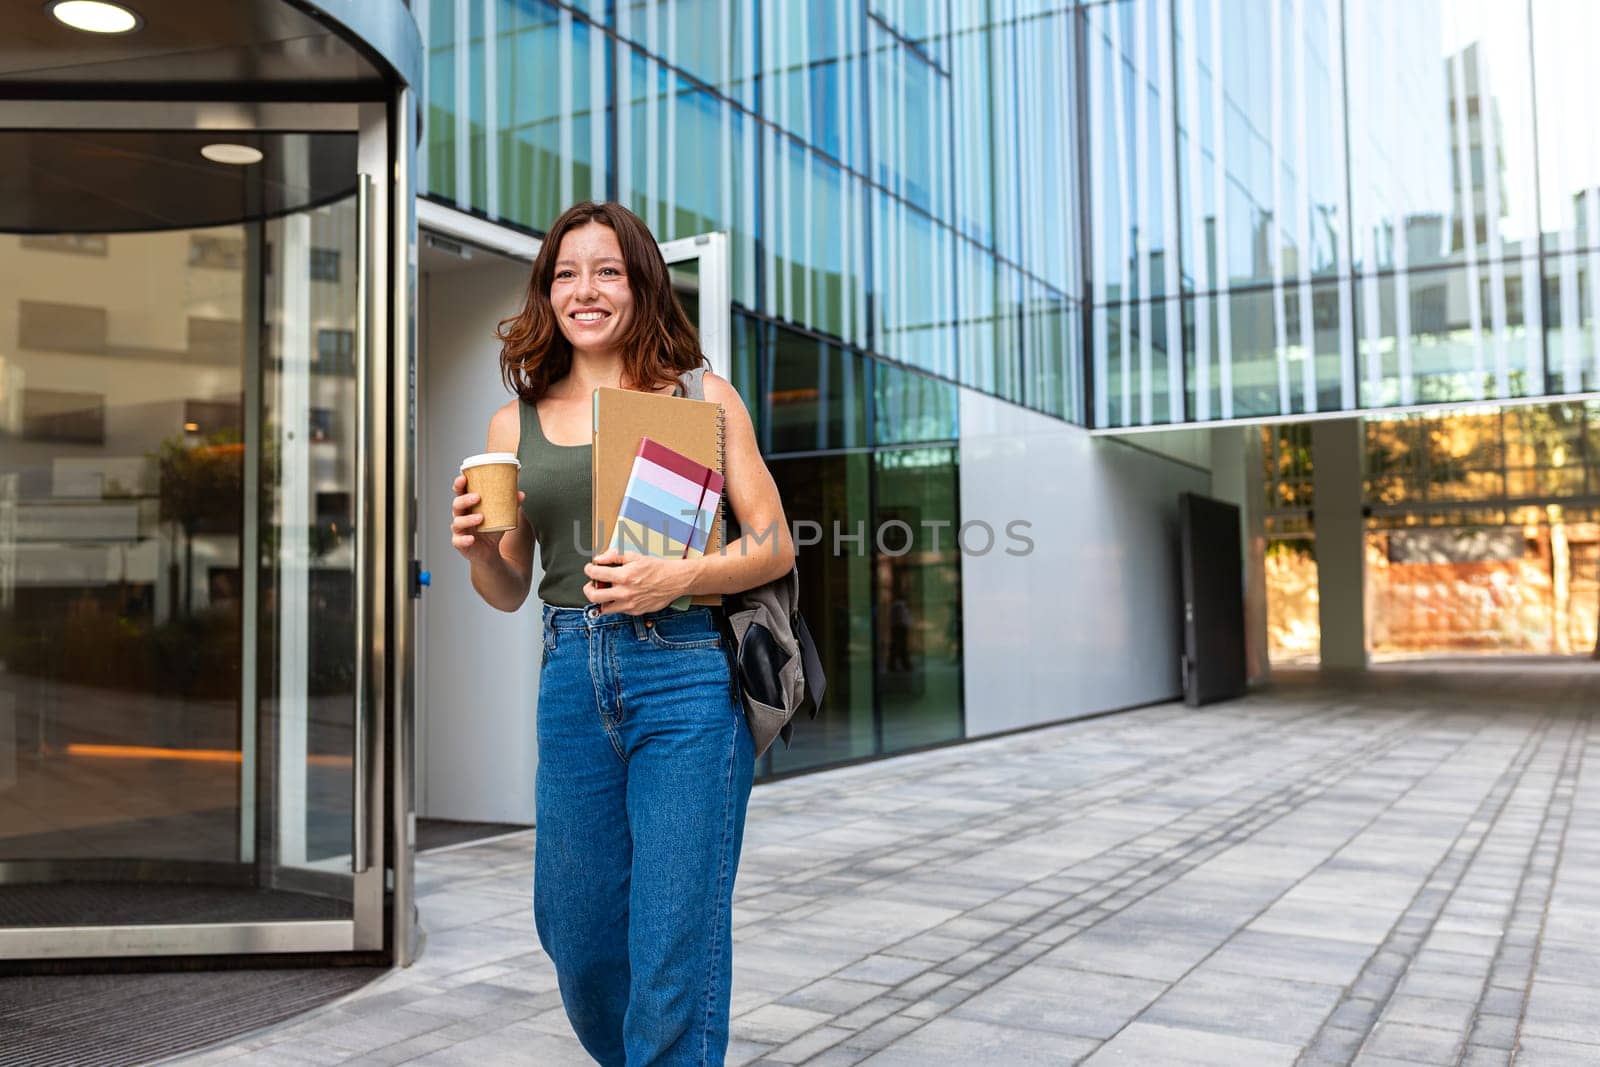 Young redhead happy female university student with backpack walking to class in college campus holding cup of coffee and notebooks. Copy space. Higher education concept.